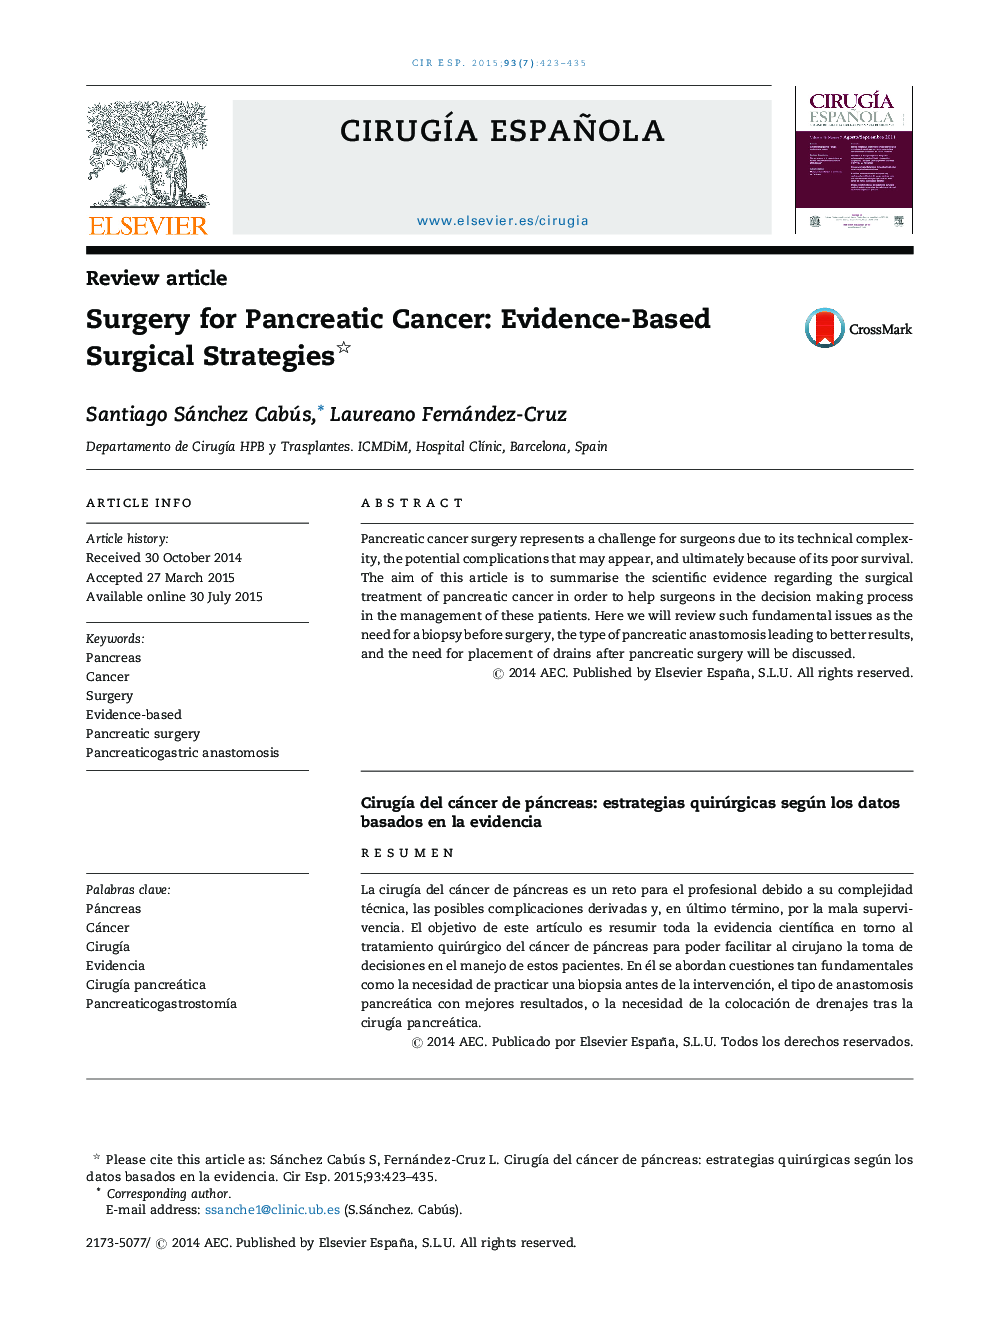 Surgery for Pancreatic Cancer: Evidence-Based Surgical Strategies 